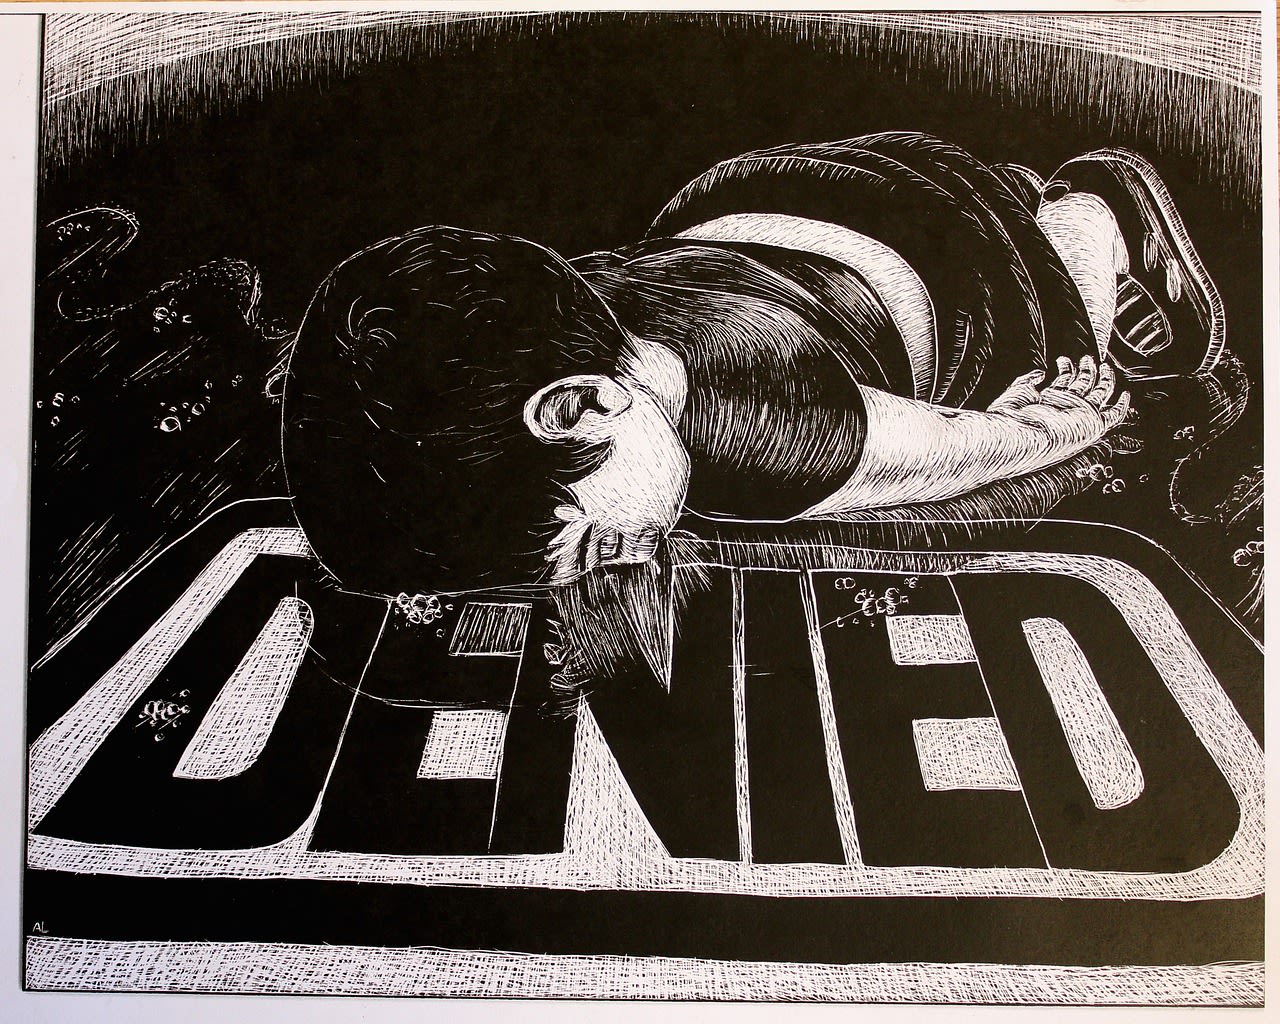 An illustration of a boy facedown in a puddle on top of the word 'denied' in block capitals